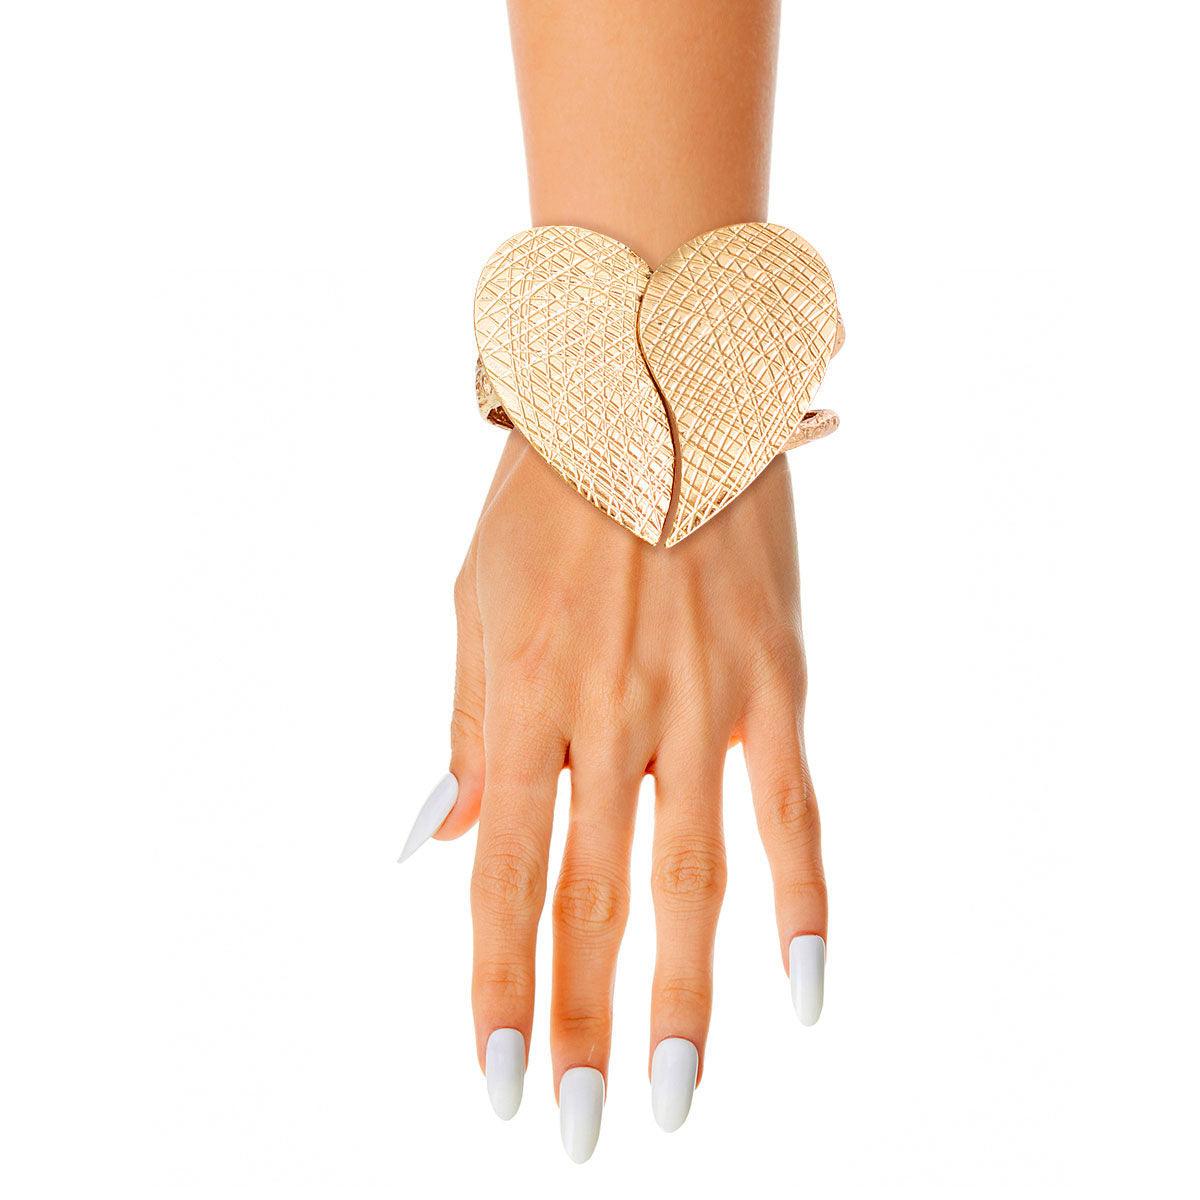 Glam up Your Look with a Stunning Golden Heart Cuff Bracelet